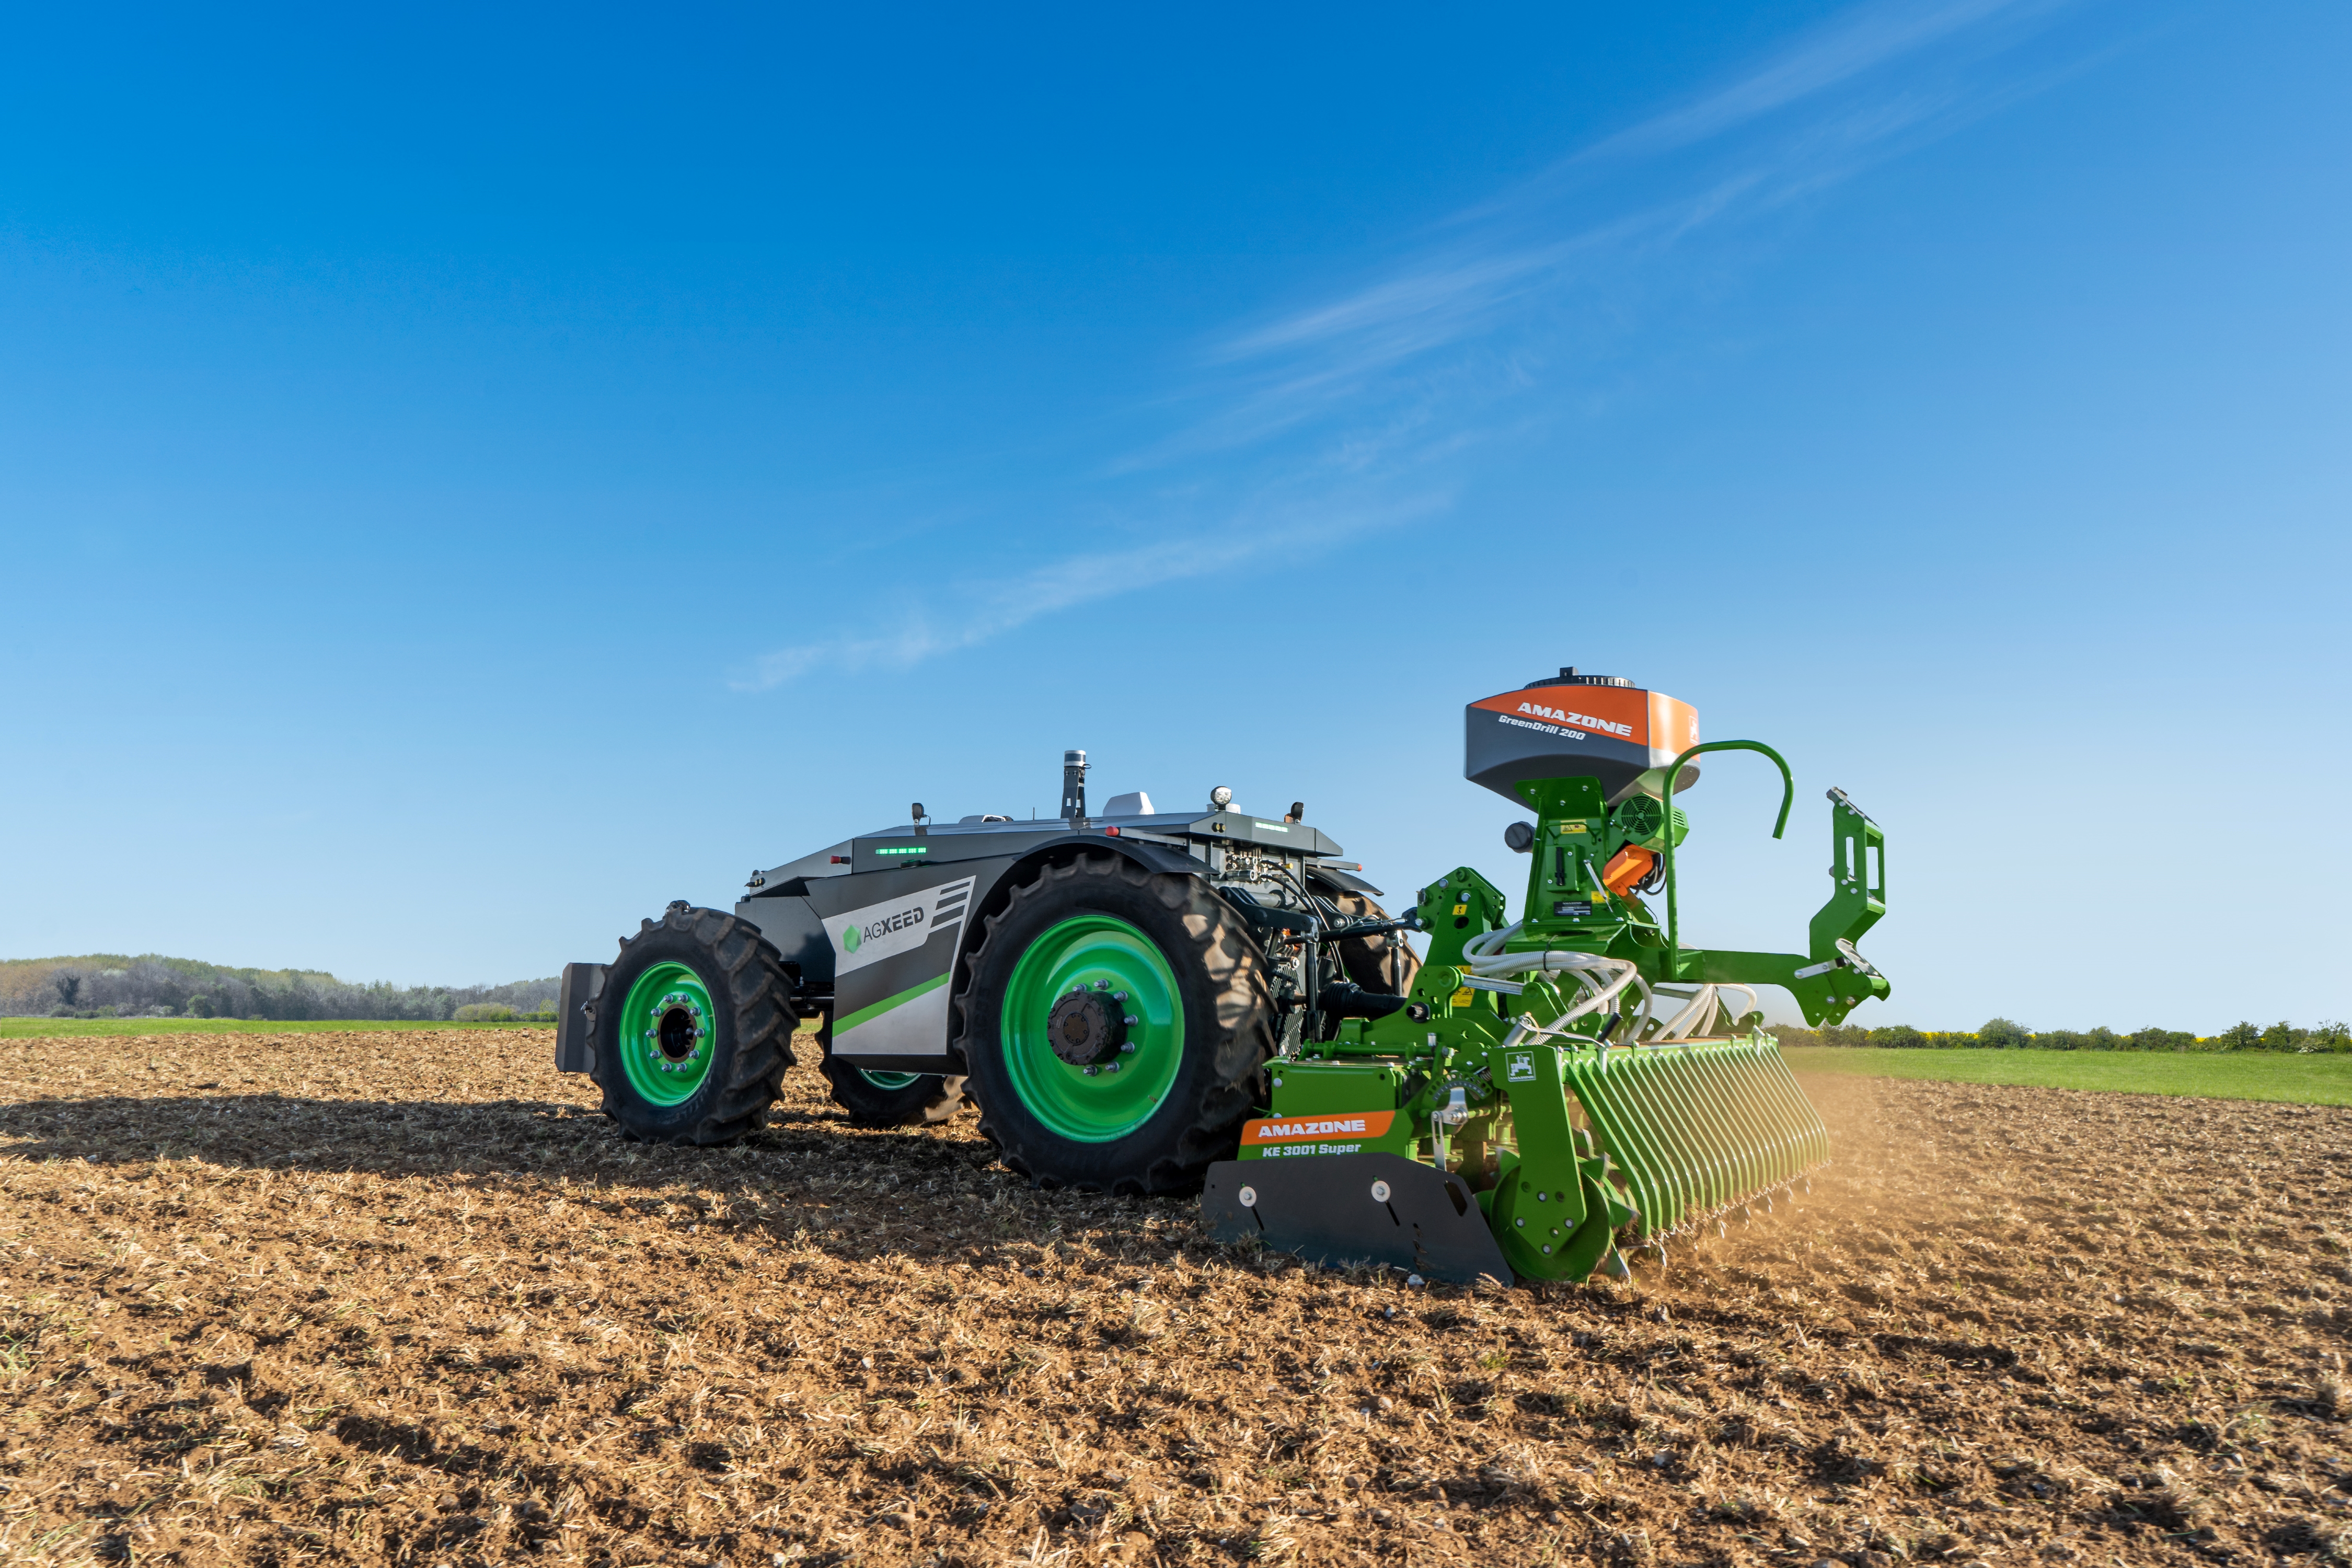 The 4-wheeled AgXeed AgBot and 3 m AMAZONE rotary harrow with GreenDrill catch crop seeder box